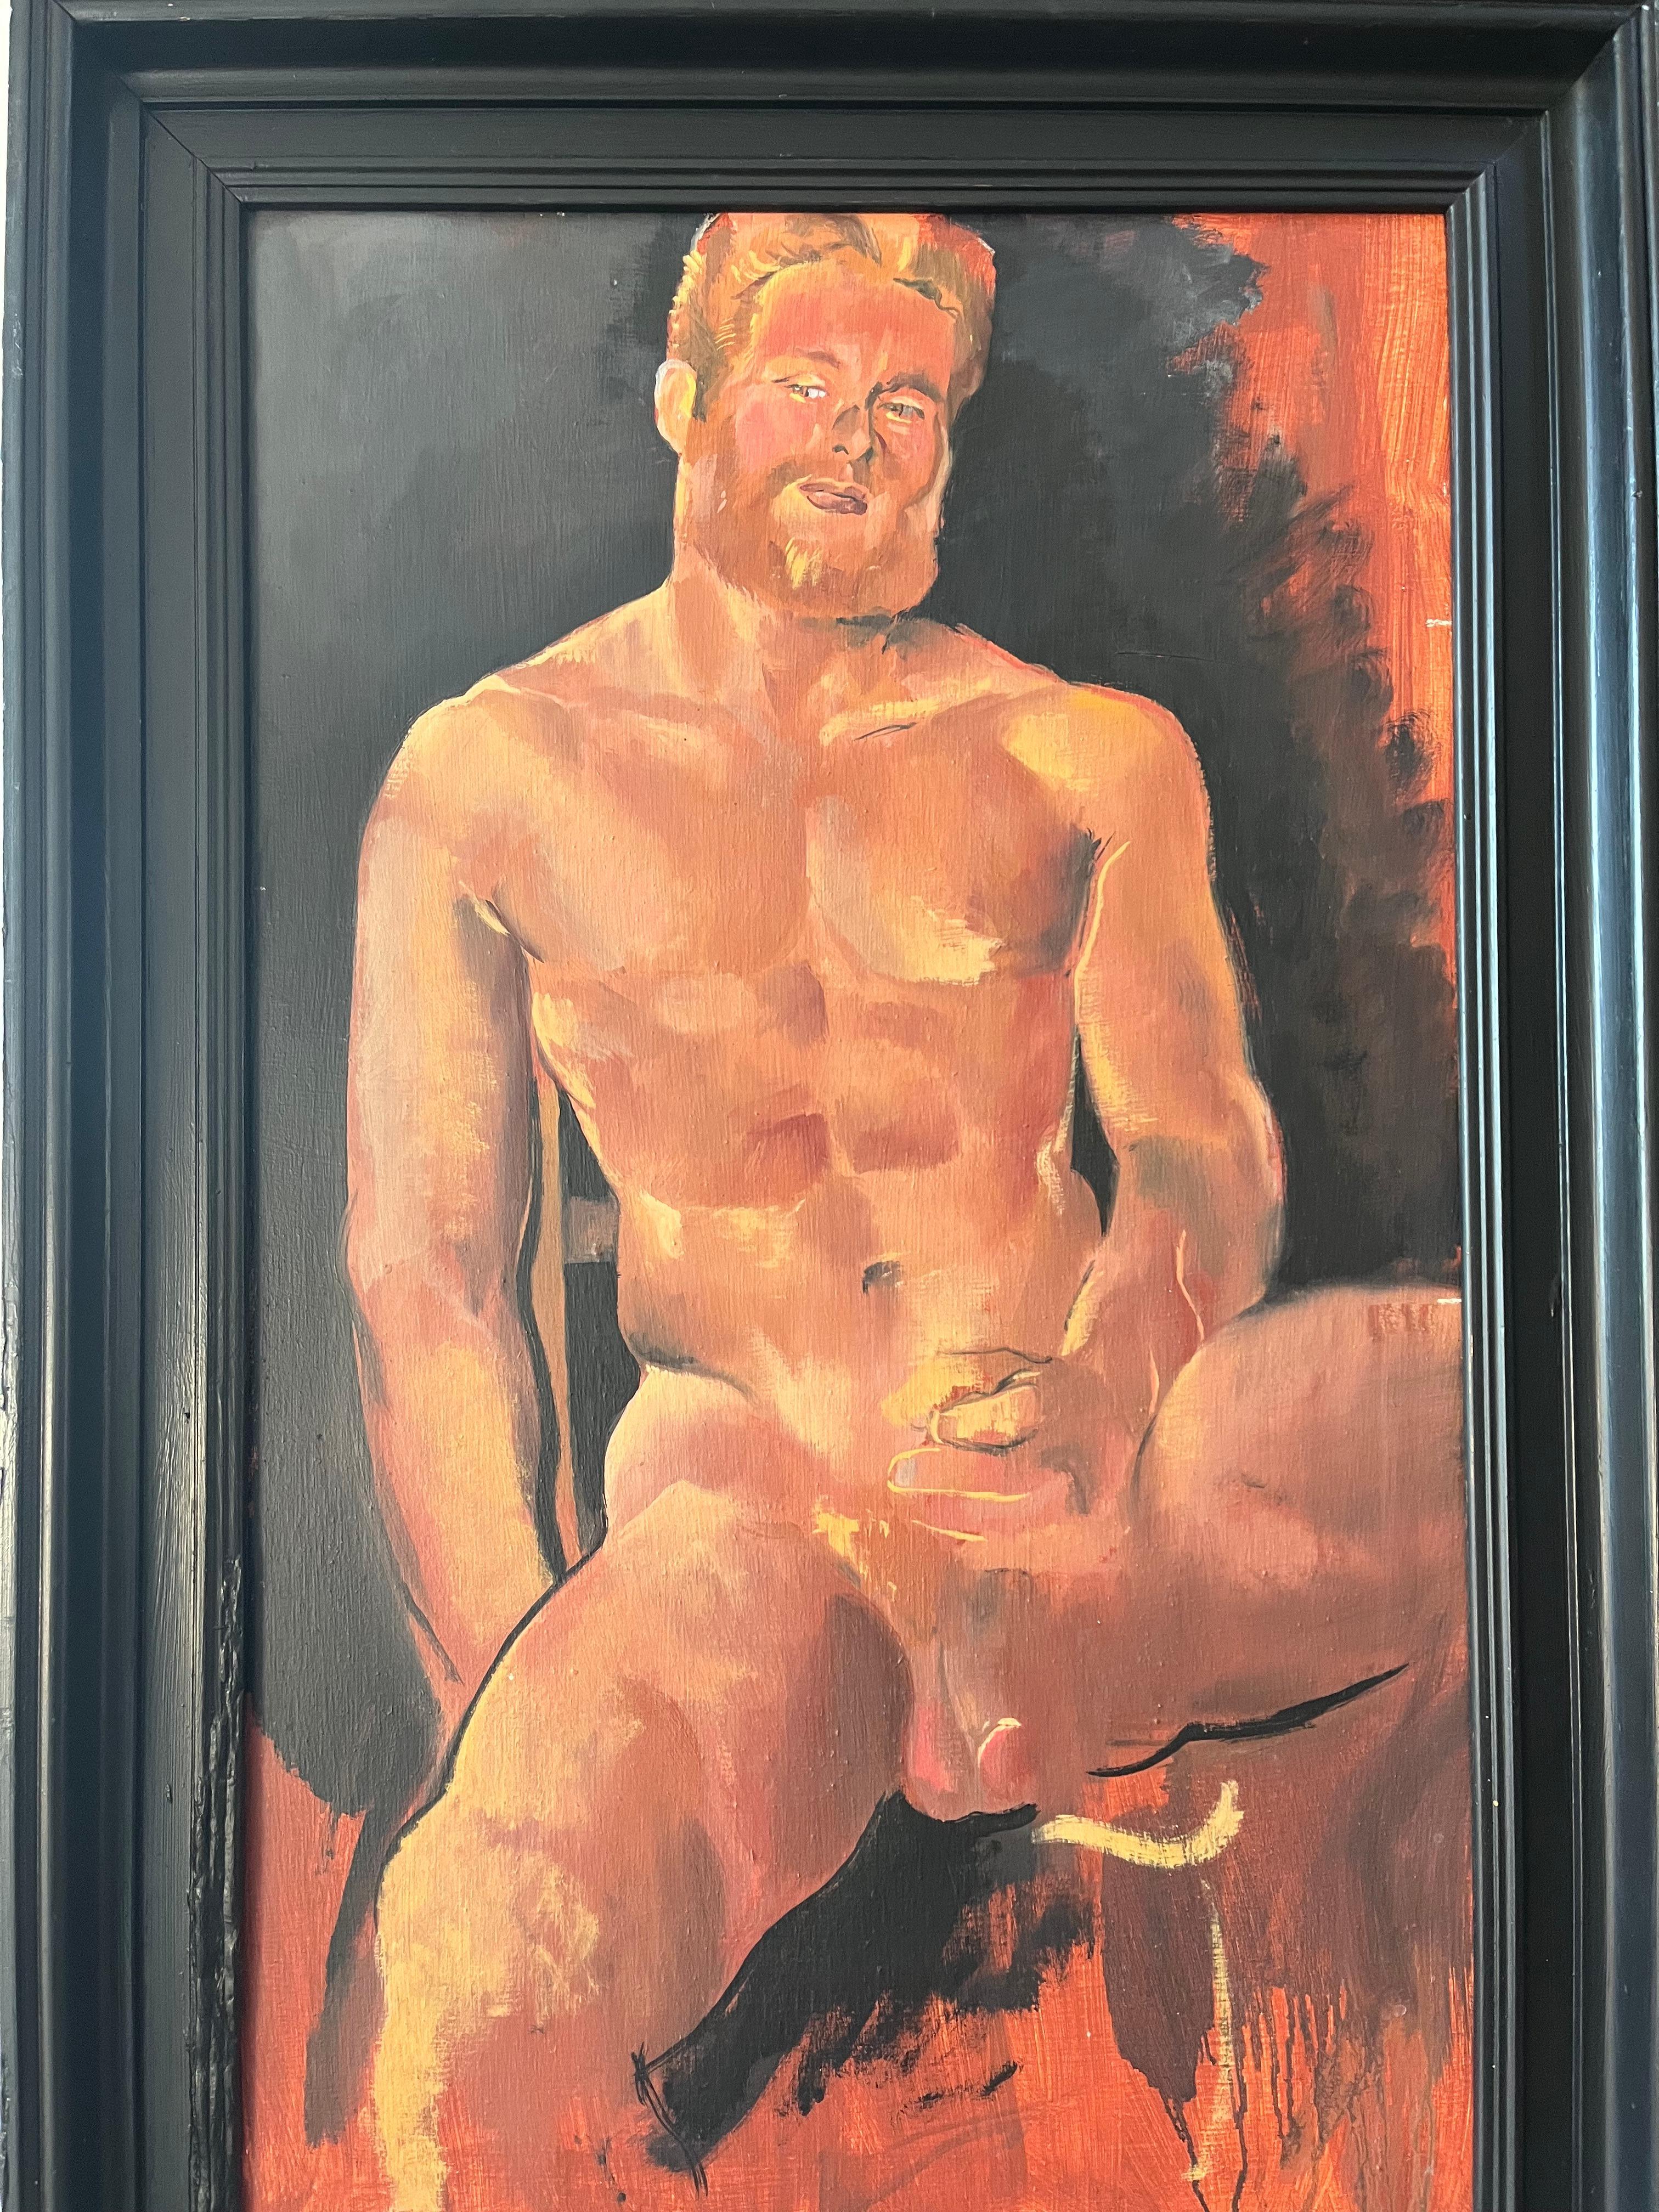 1980s Erotic nude male portrait of artist's lover, Iconic piece from gay history - Modern Painting by Philip Core